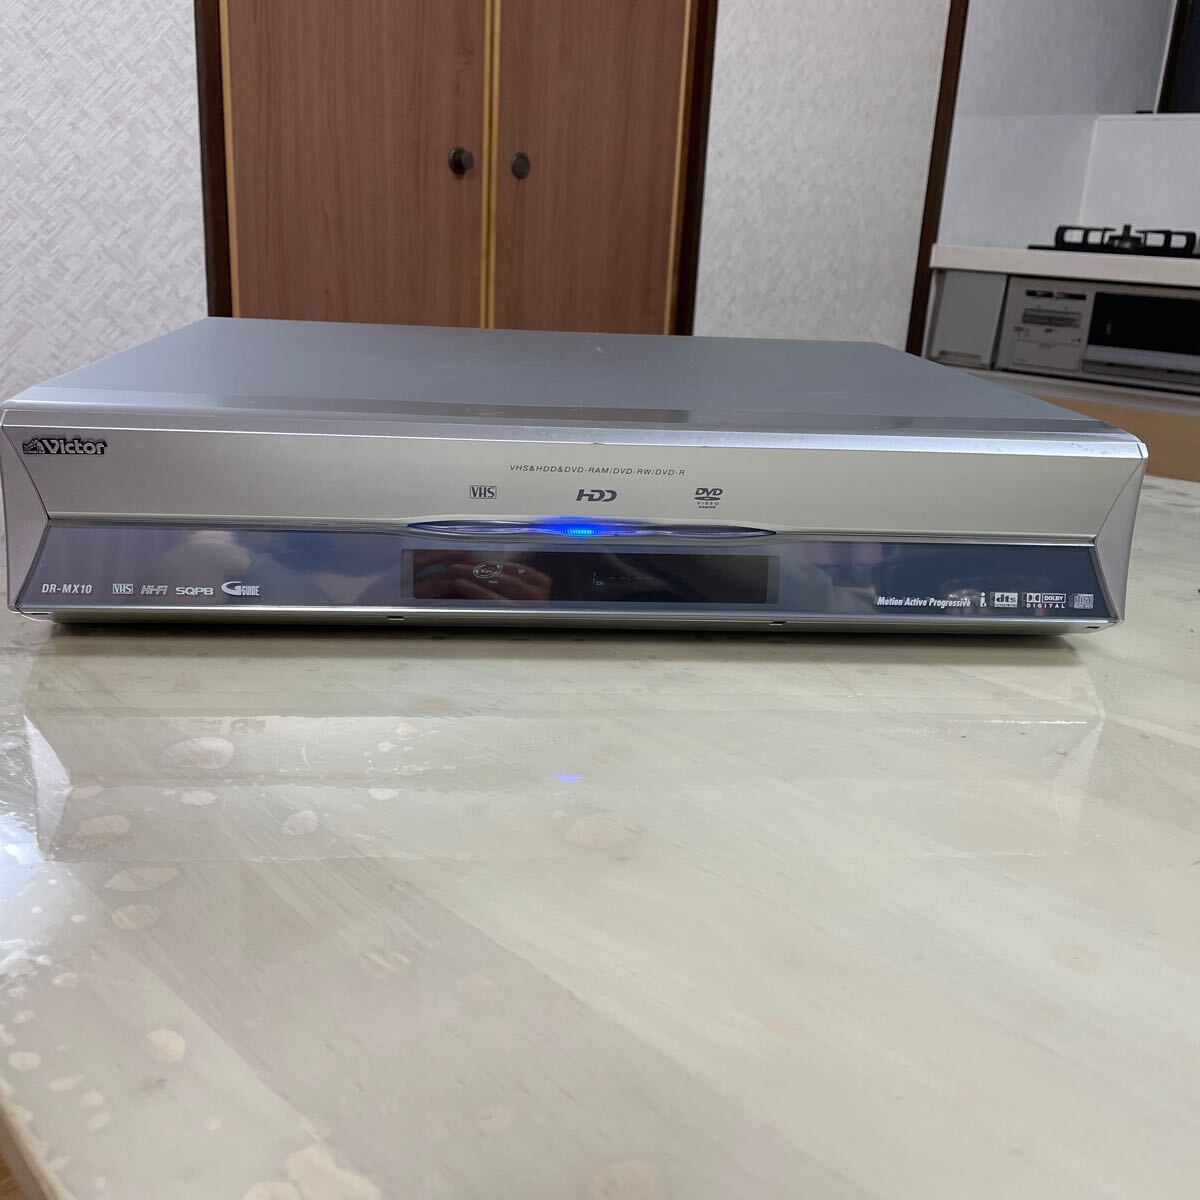 Victor/ Victor HDD/VHS/DVD DVD video recorder DR-MX10 2005 year made secondhand goods * present condition ..